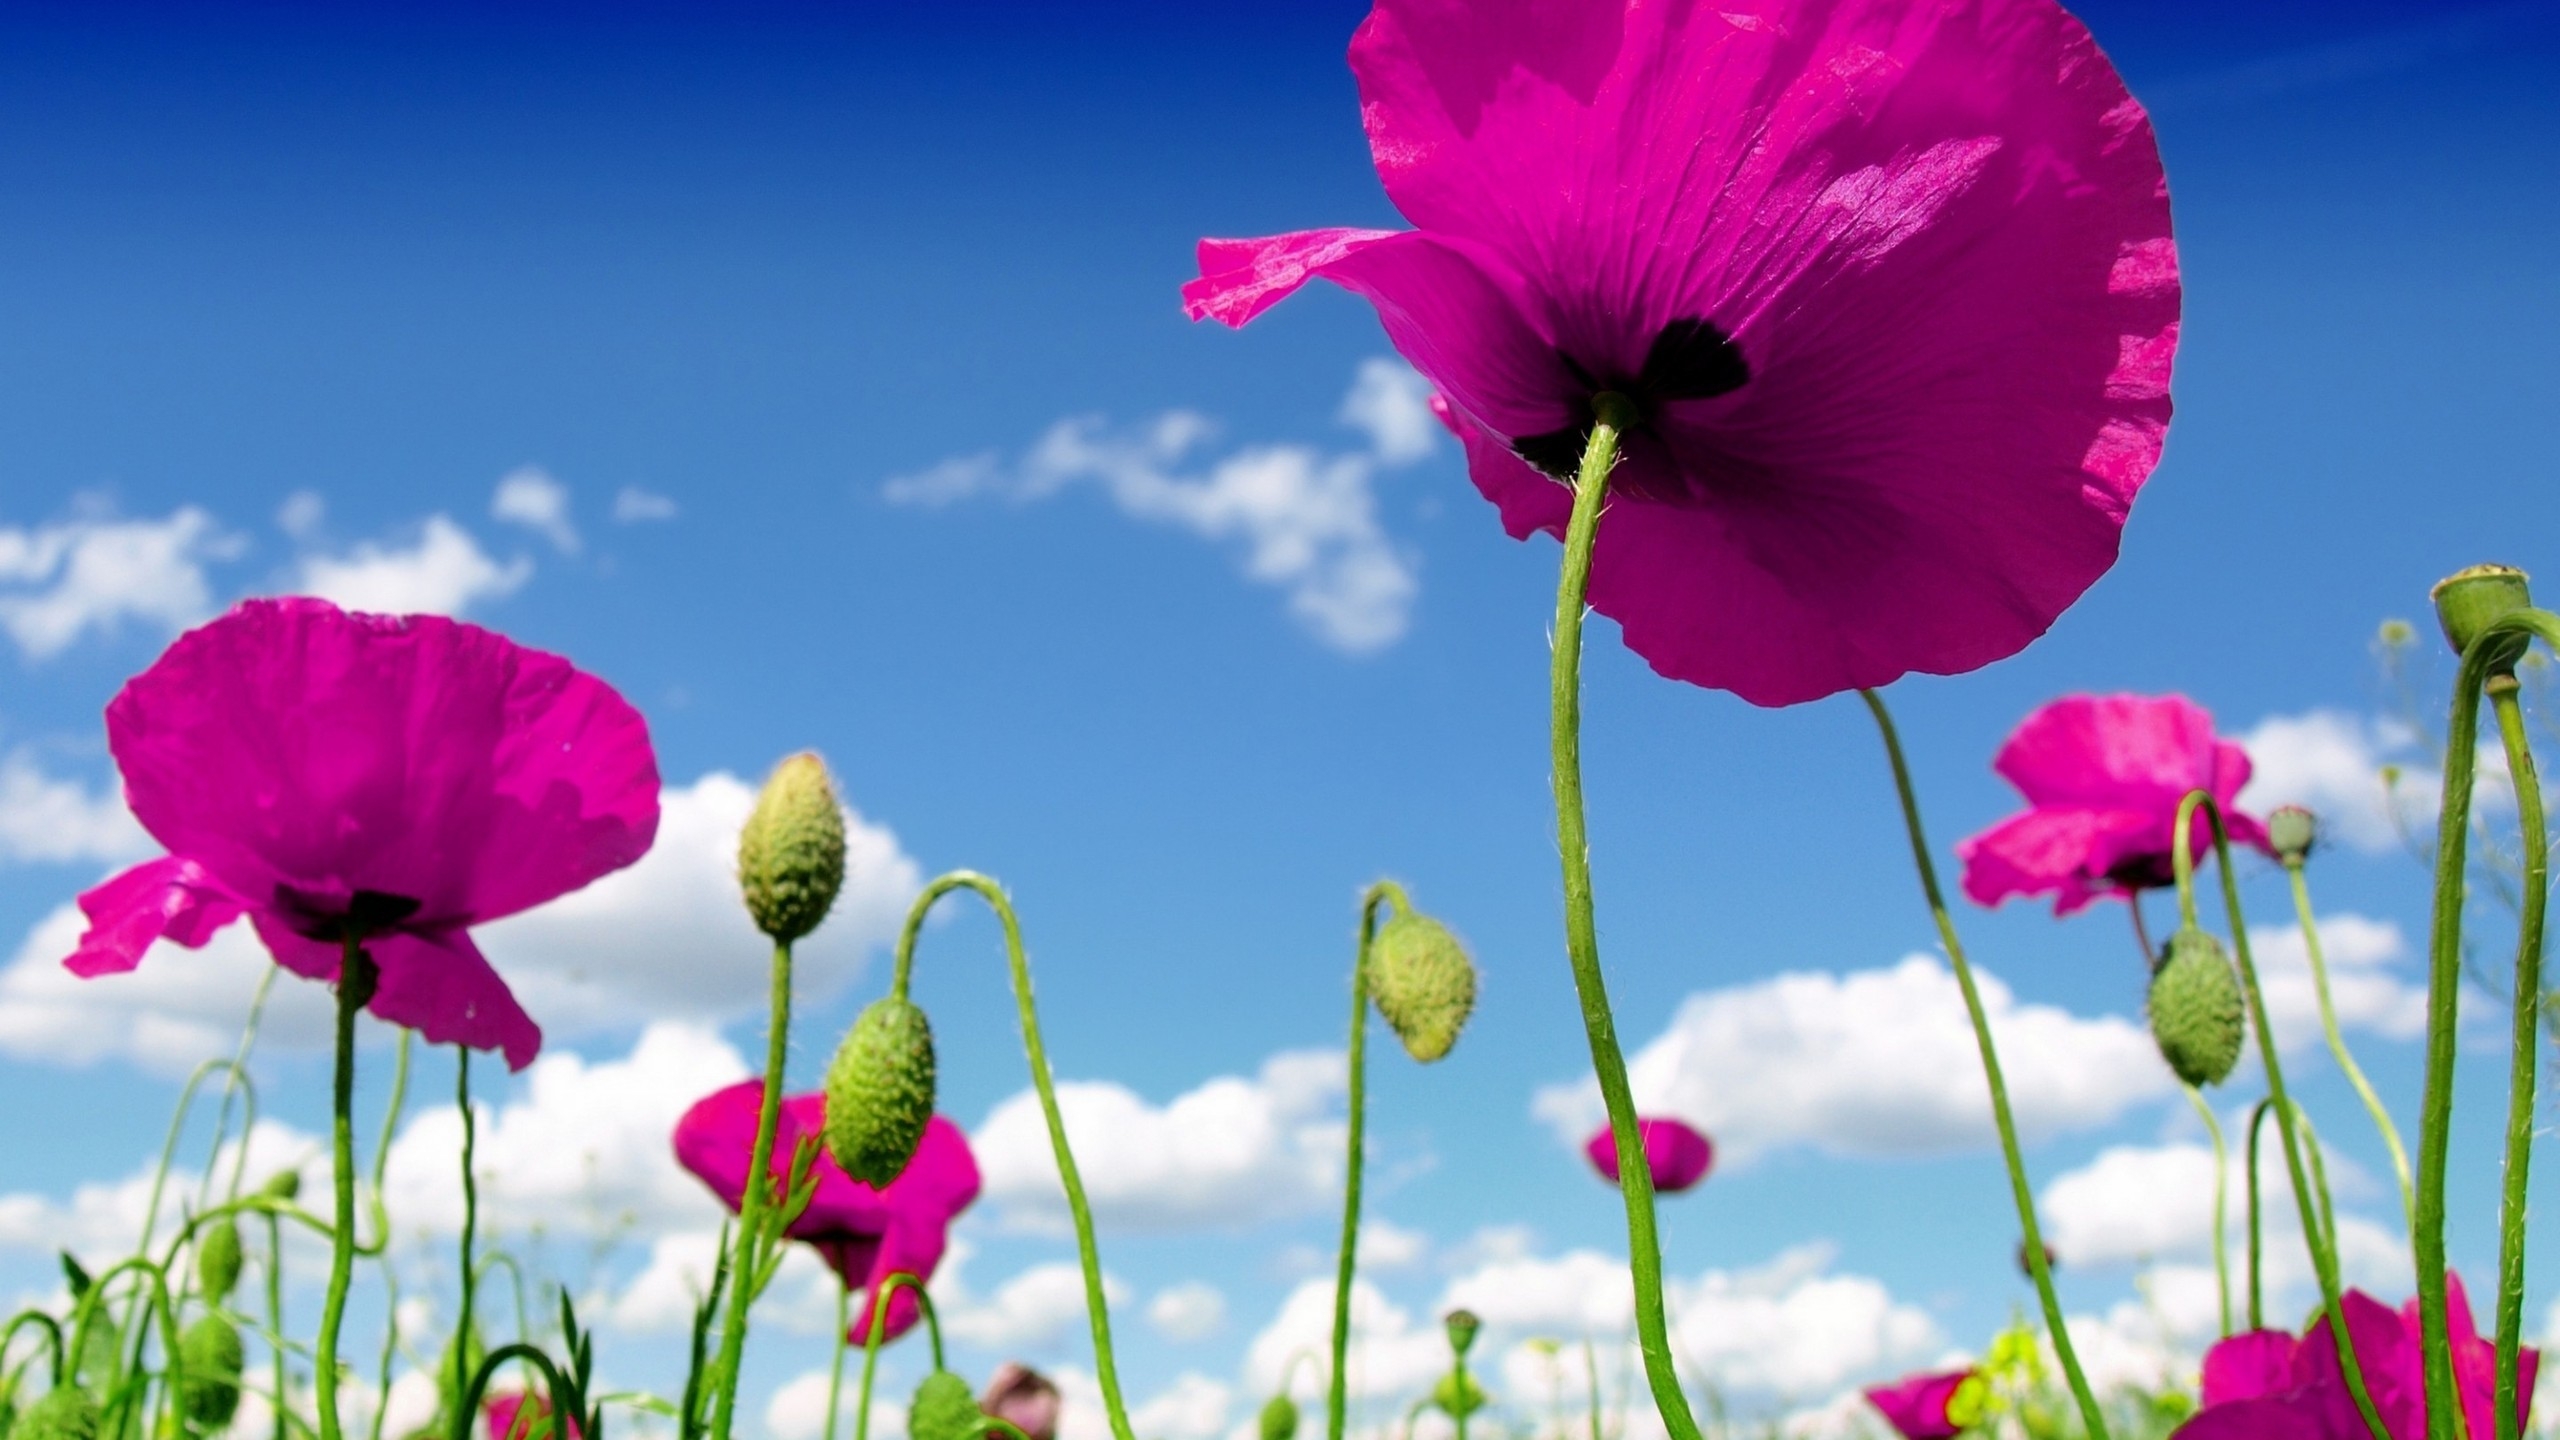 Pink Poppies for 2560x1440 HDTV resolution